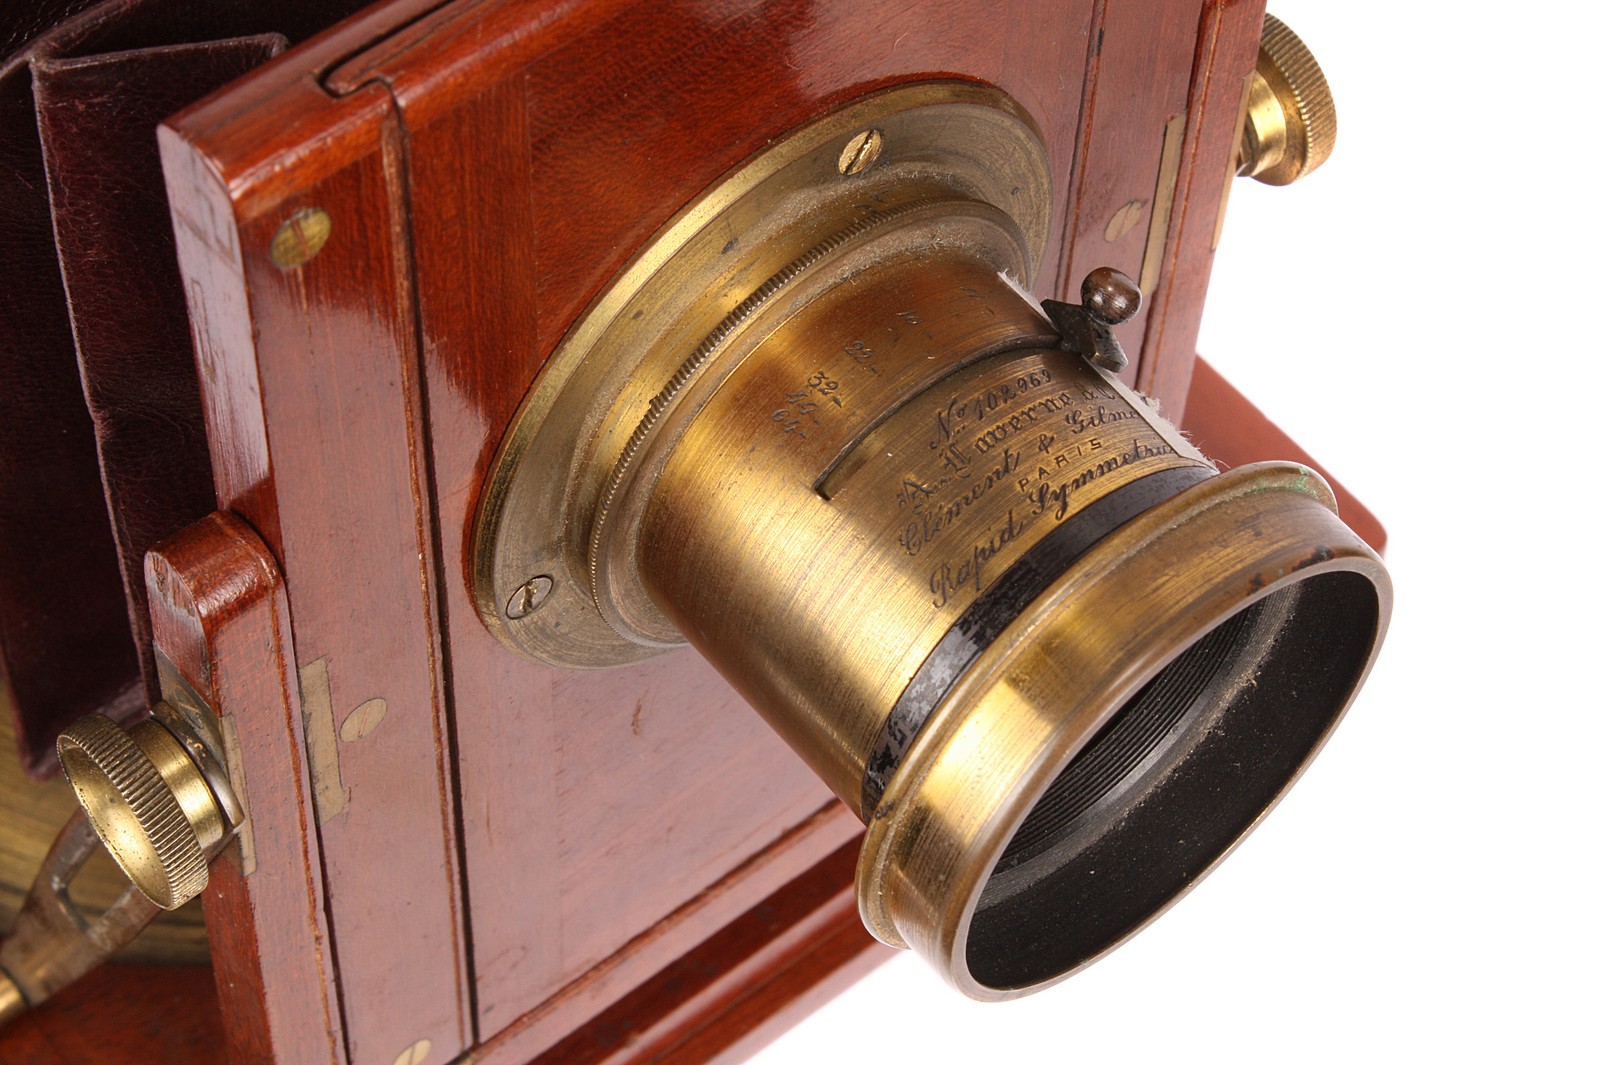 A Mc Kellen’s Treble Patent Mahogany Field Camera, 4½x6¼, with Clement & Gilmer Rapid Symmetrical - Image 2 of 4